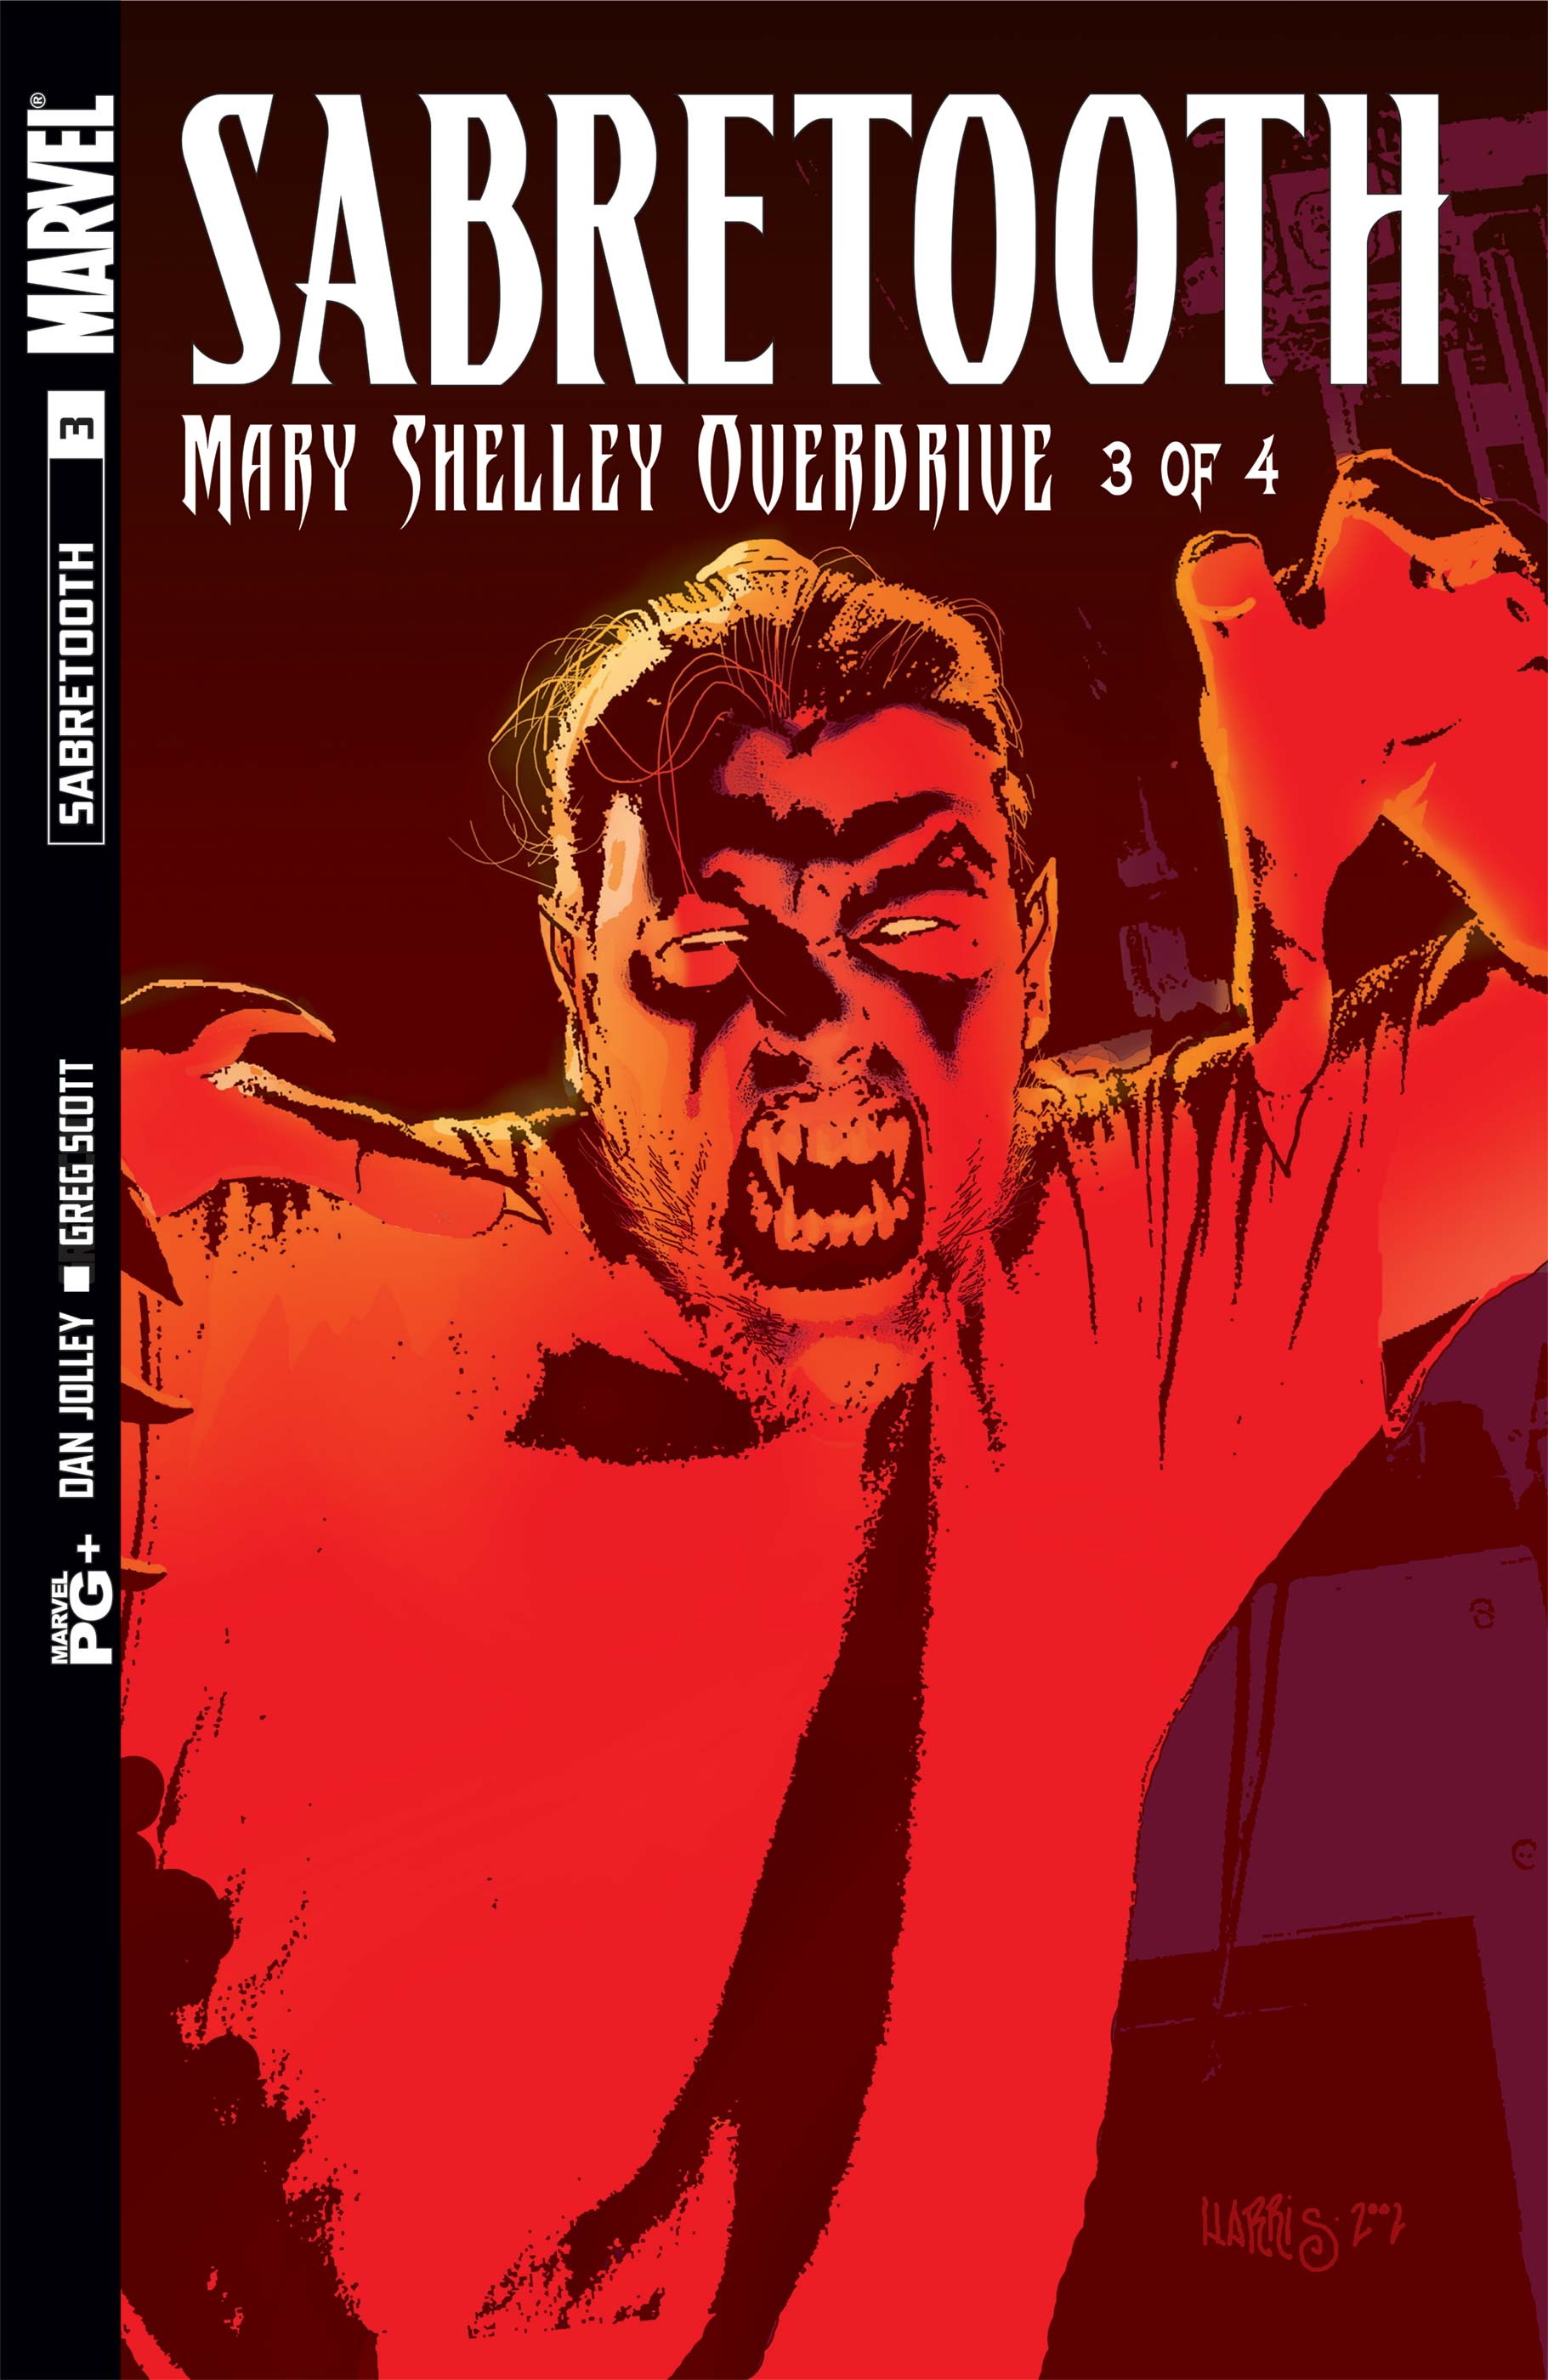 Sabretooth: Mary Shelley Overdrive (2002) #3